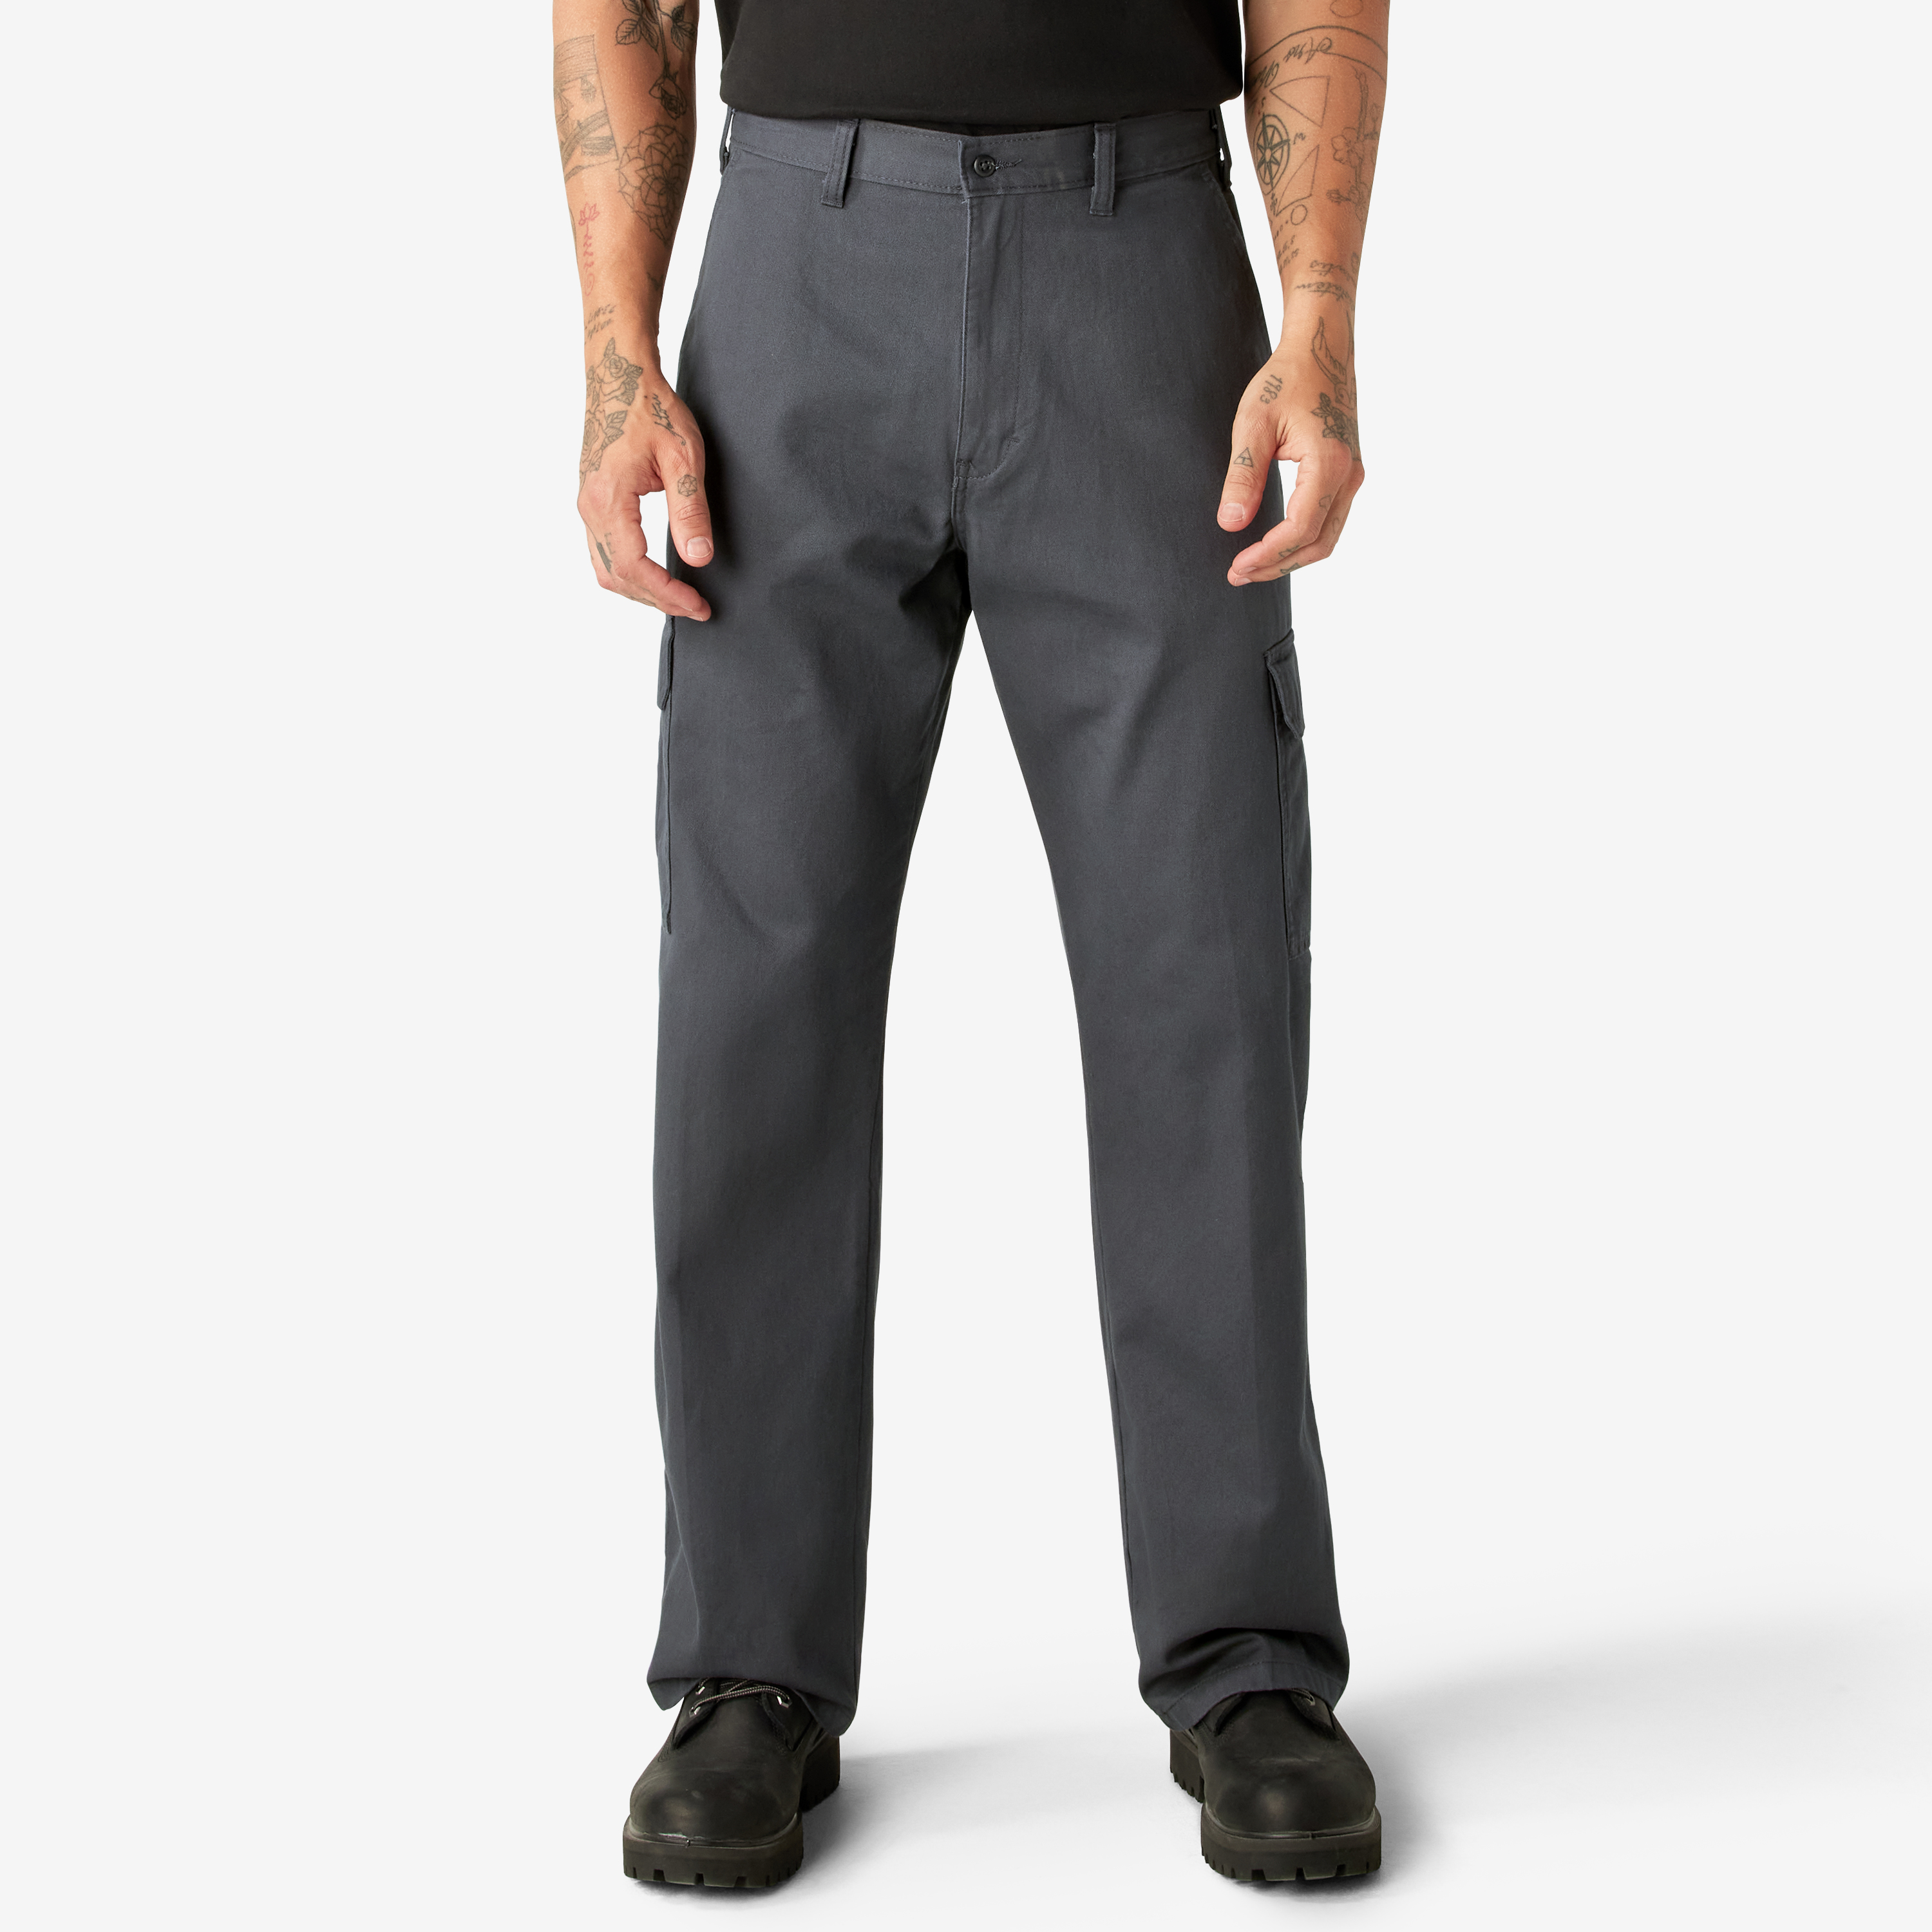 Loose Fit Straight Leg Cargo Pants - Rinsed Charcoal Gray (RCH)